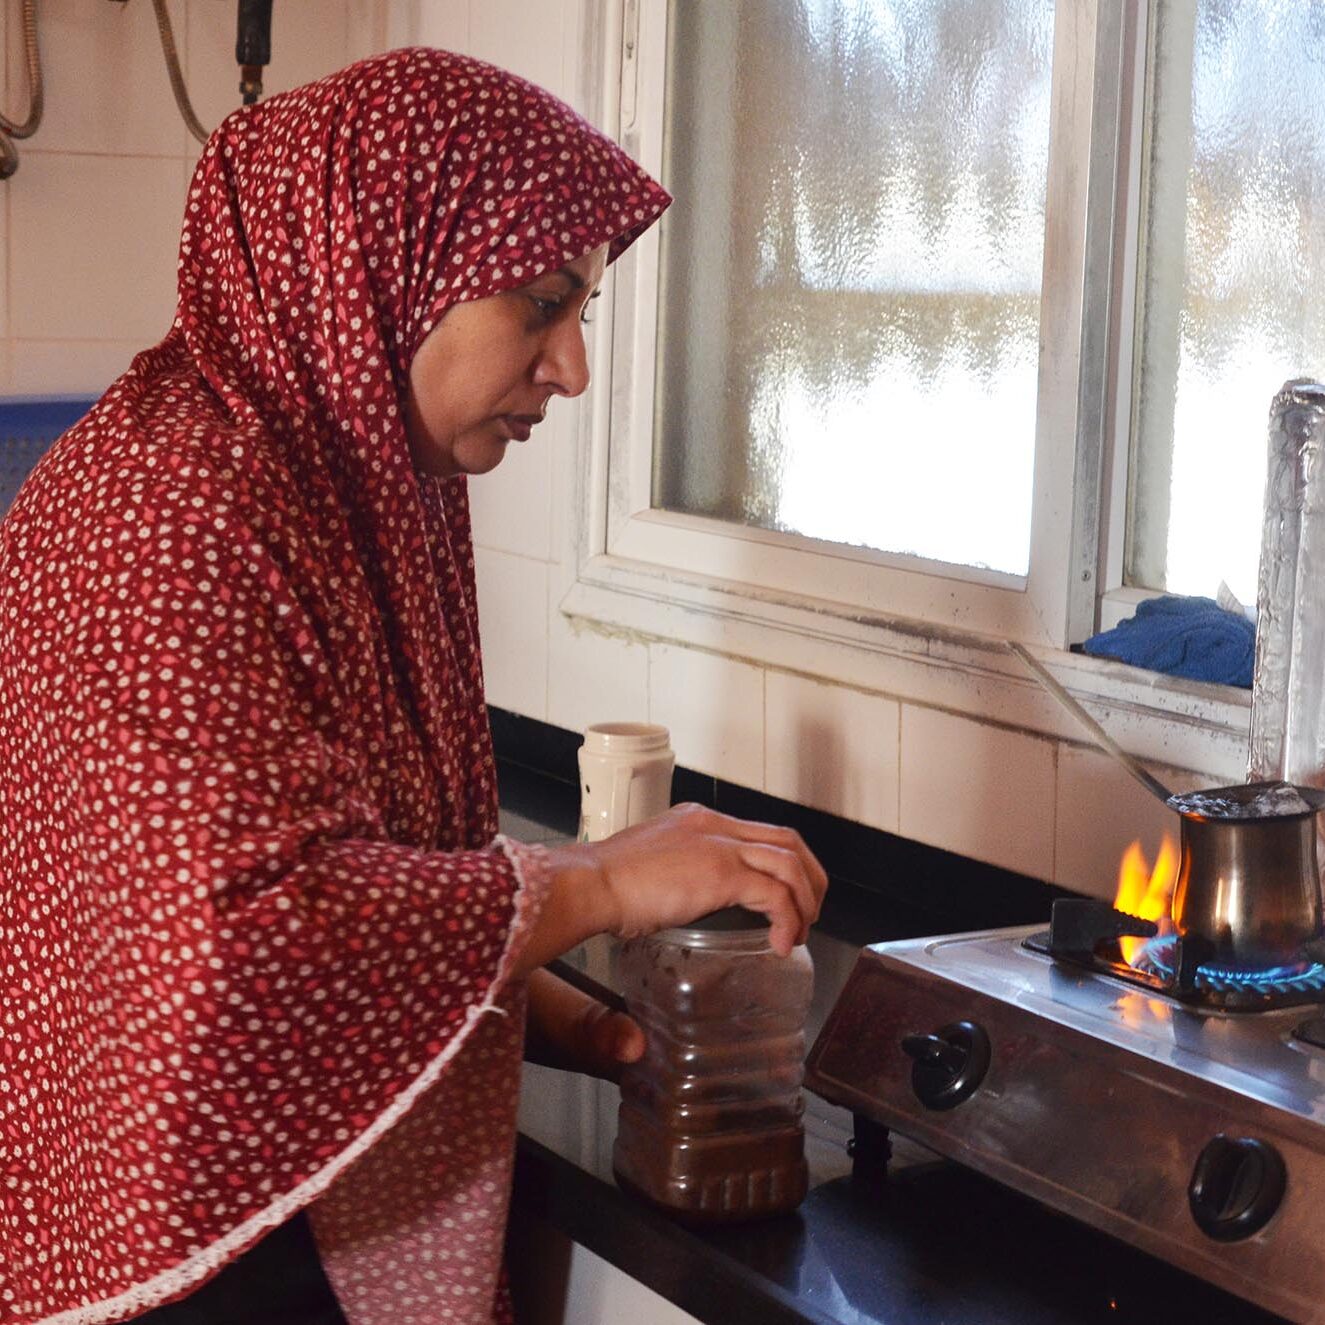 Zahira, a resident of Beit Hanoun in northern Gaza, boiling water in her coffee pot.